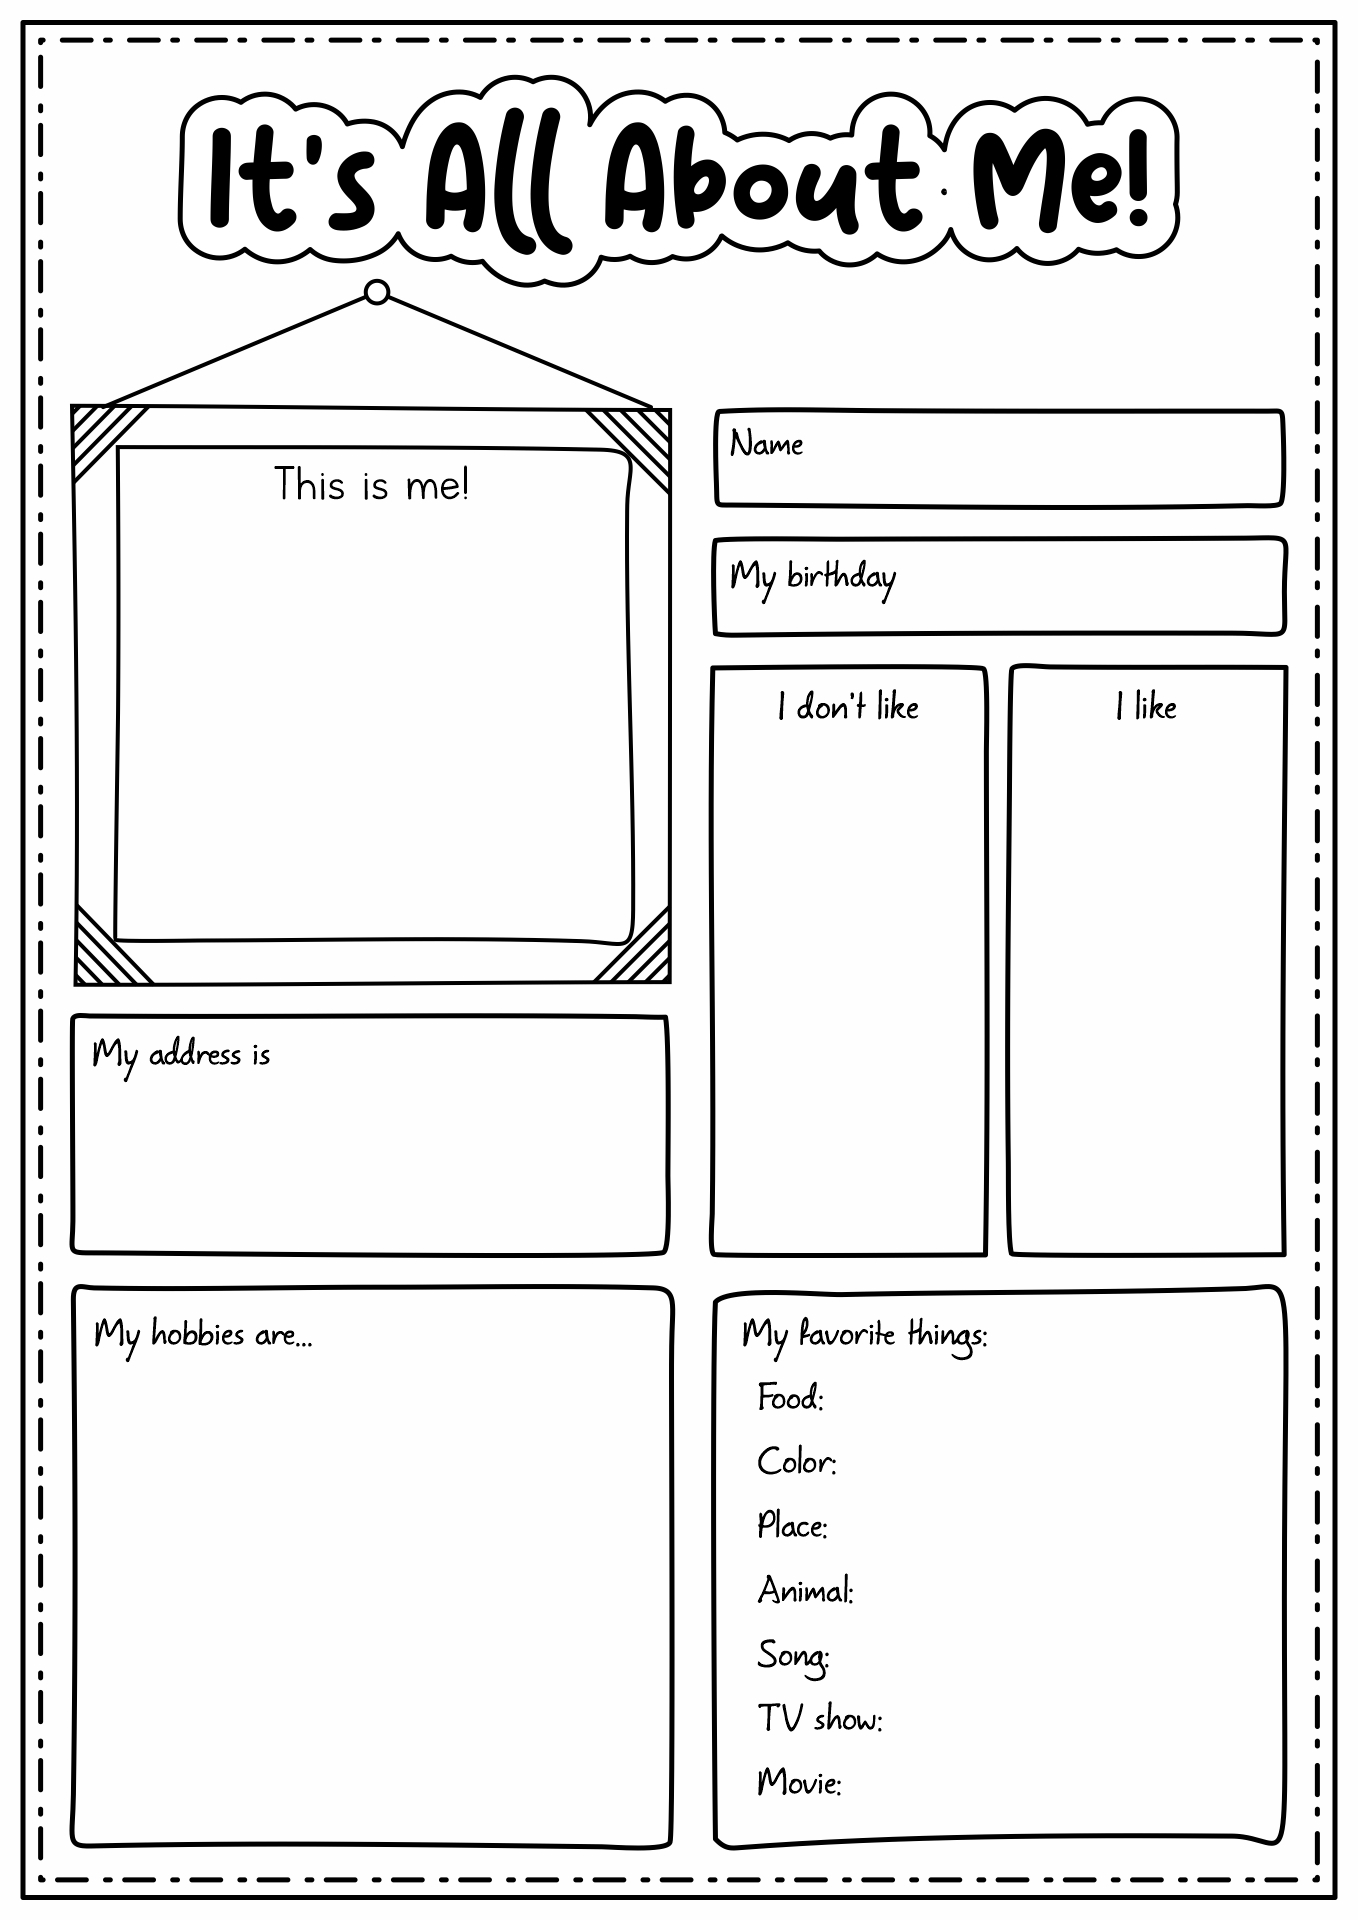 All About Me Activity Worksheets Image